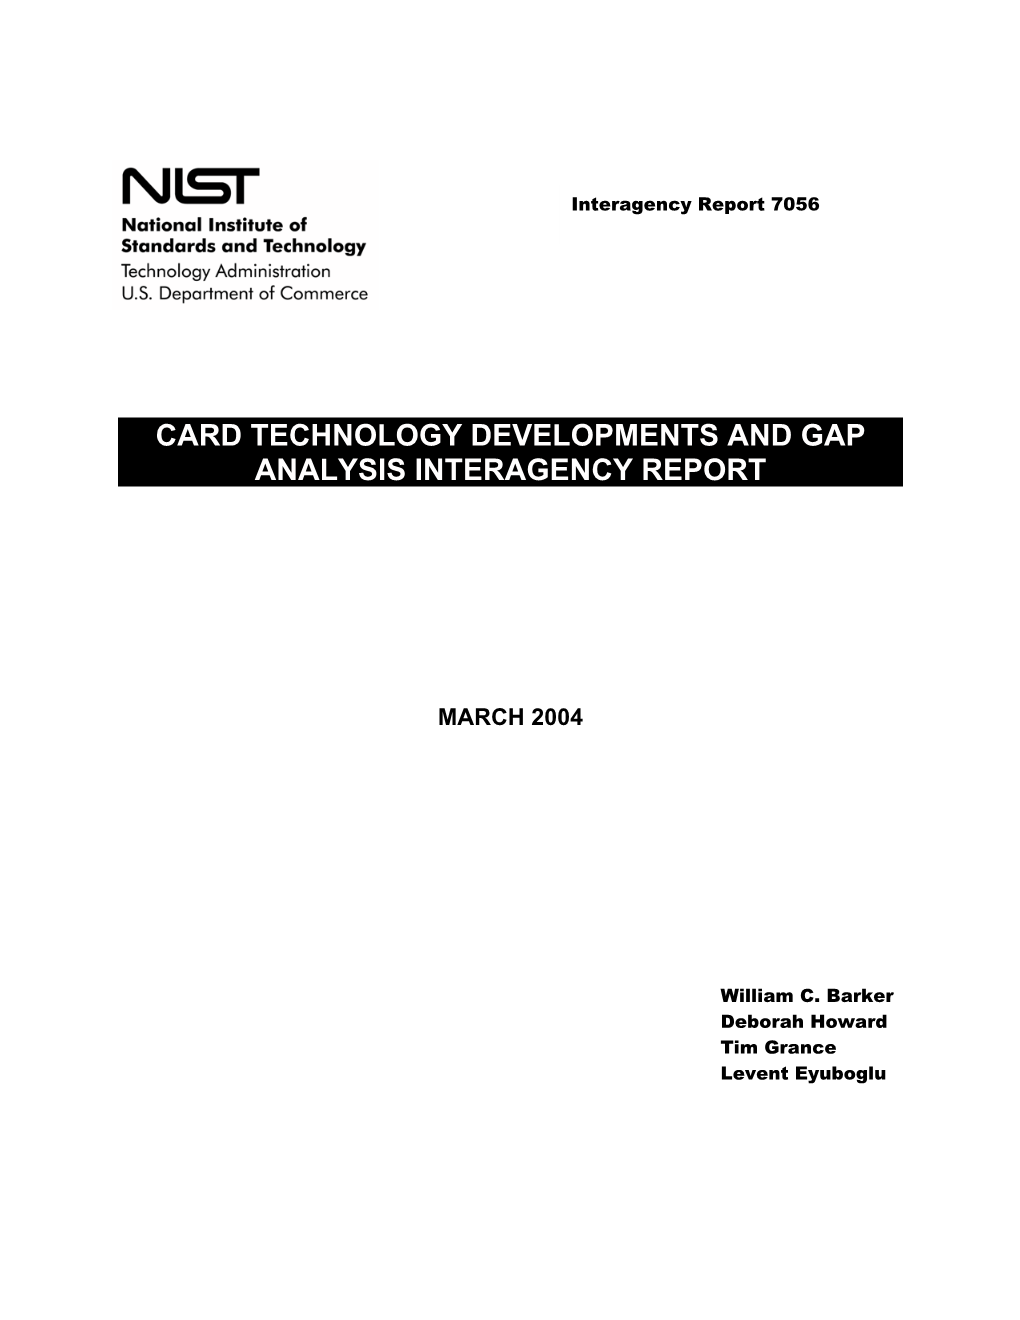 Card Technology Developments and Gap Analysis Interagency Report